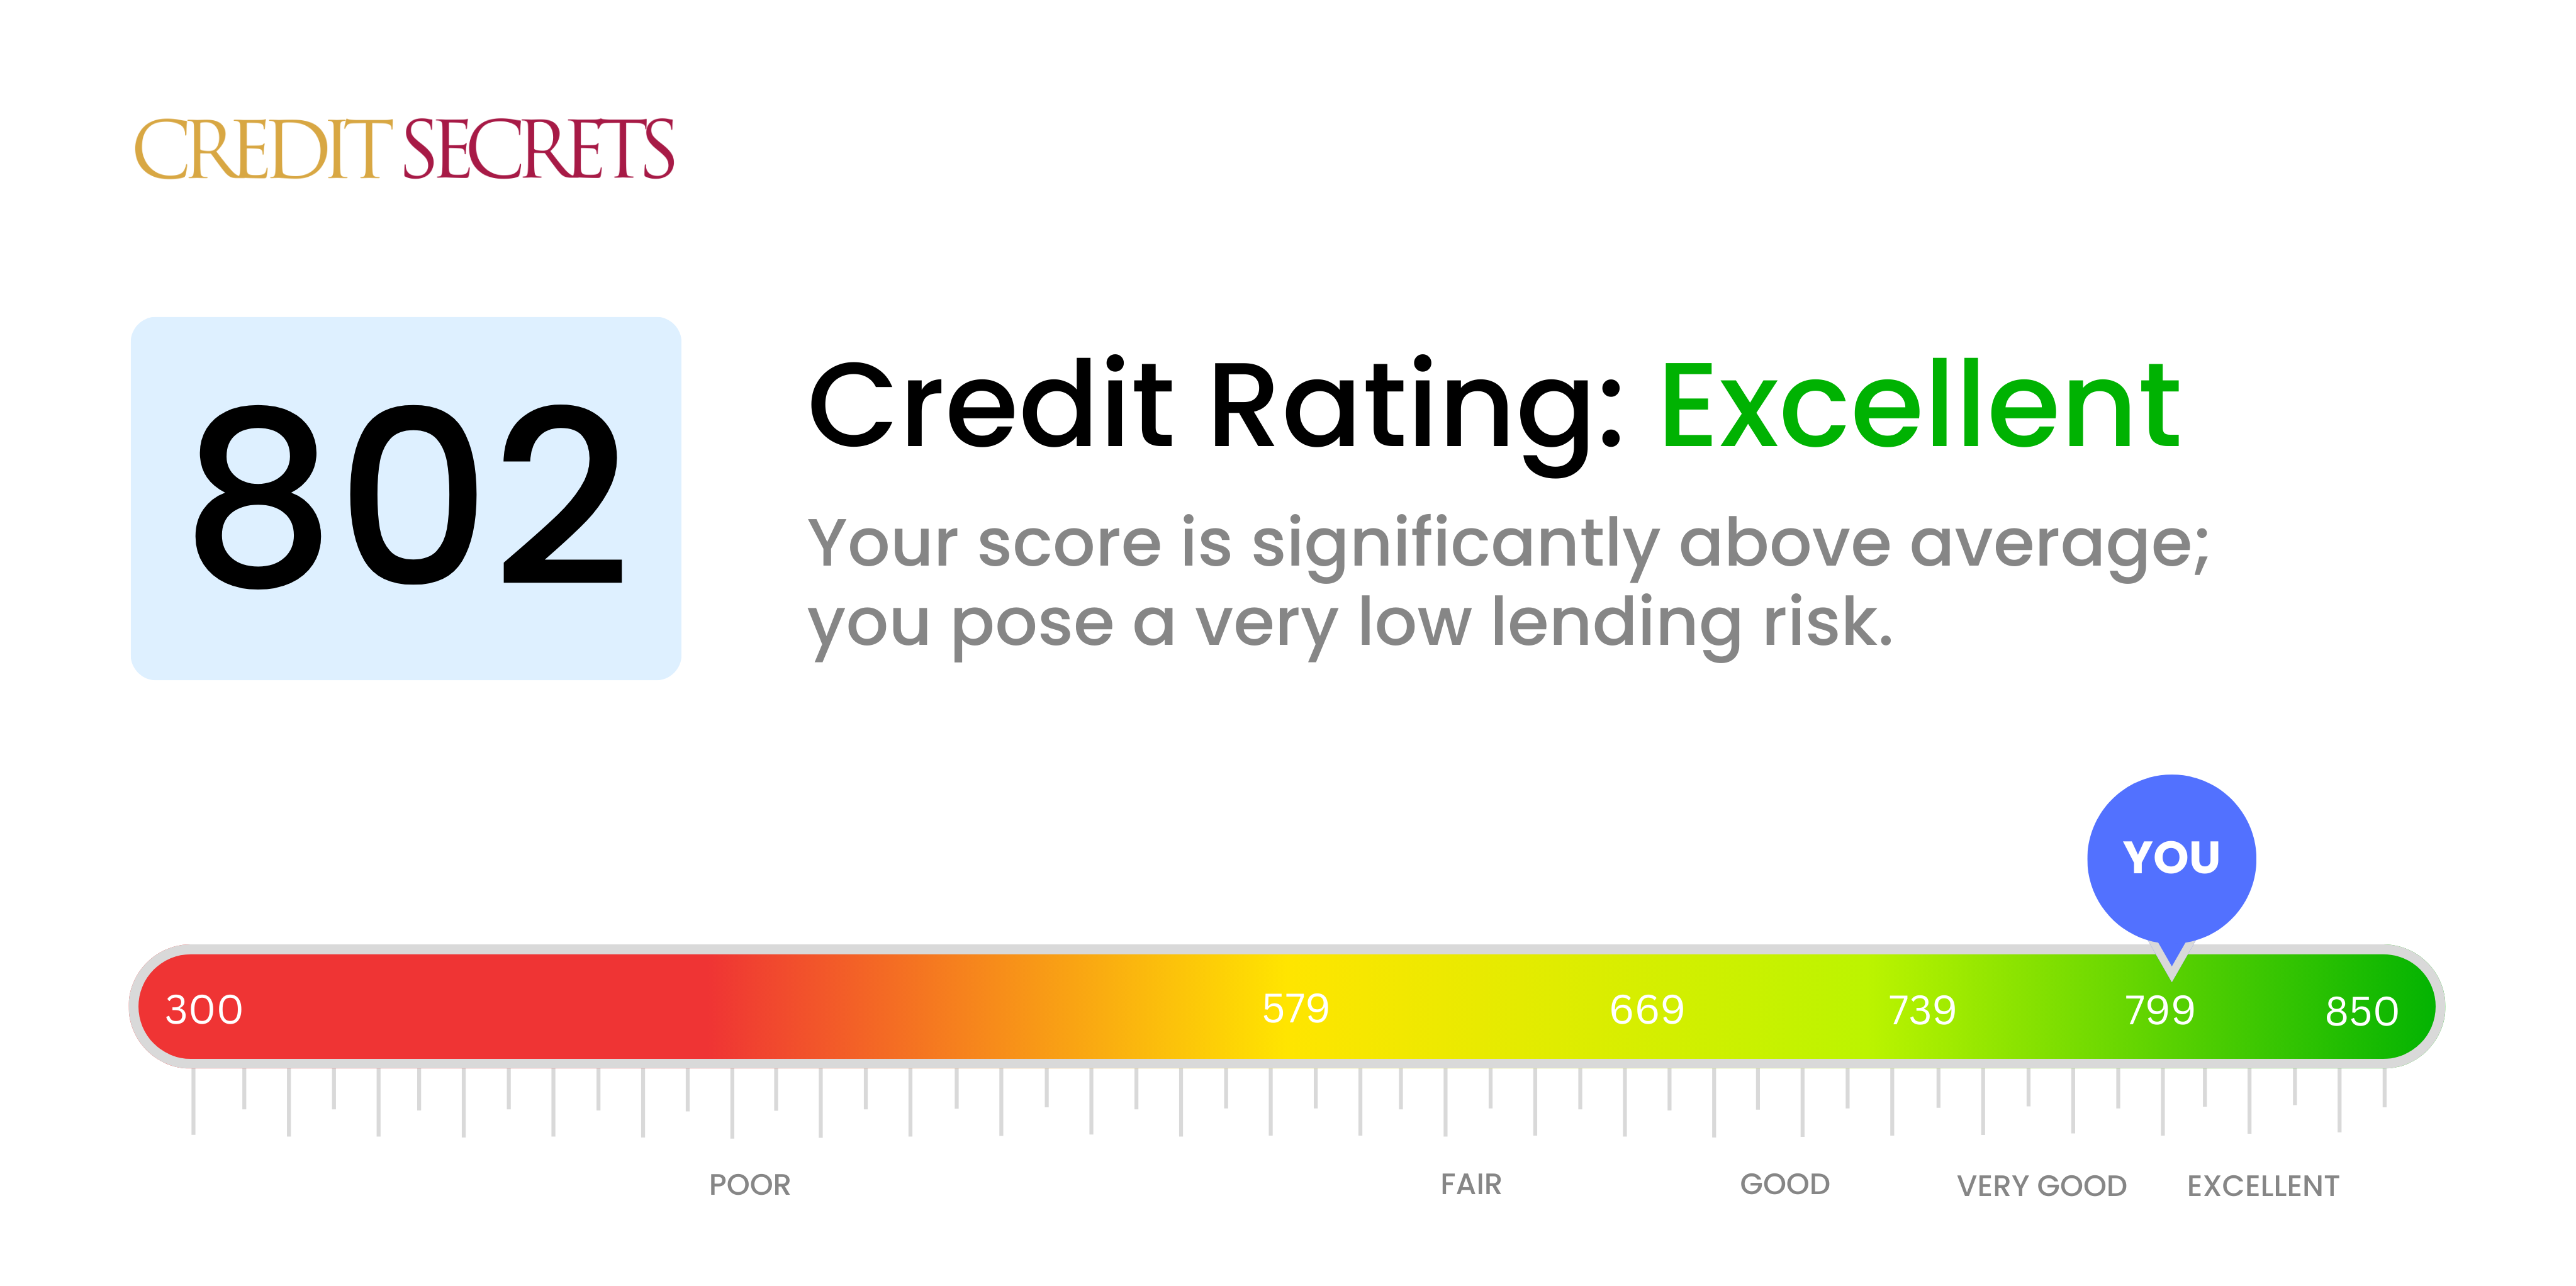 Is 802 a good credit score?